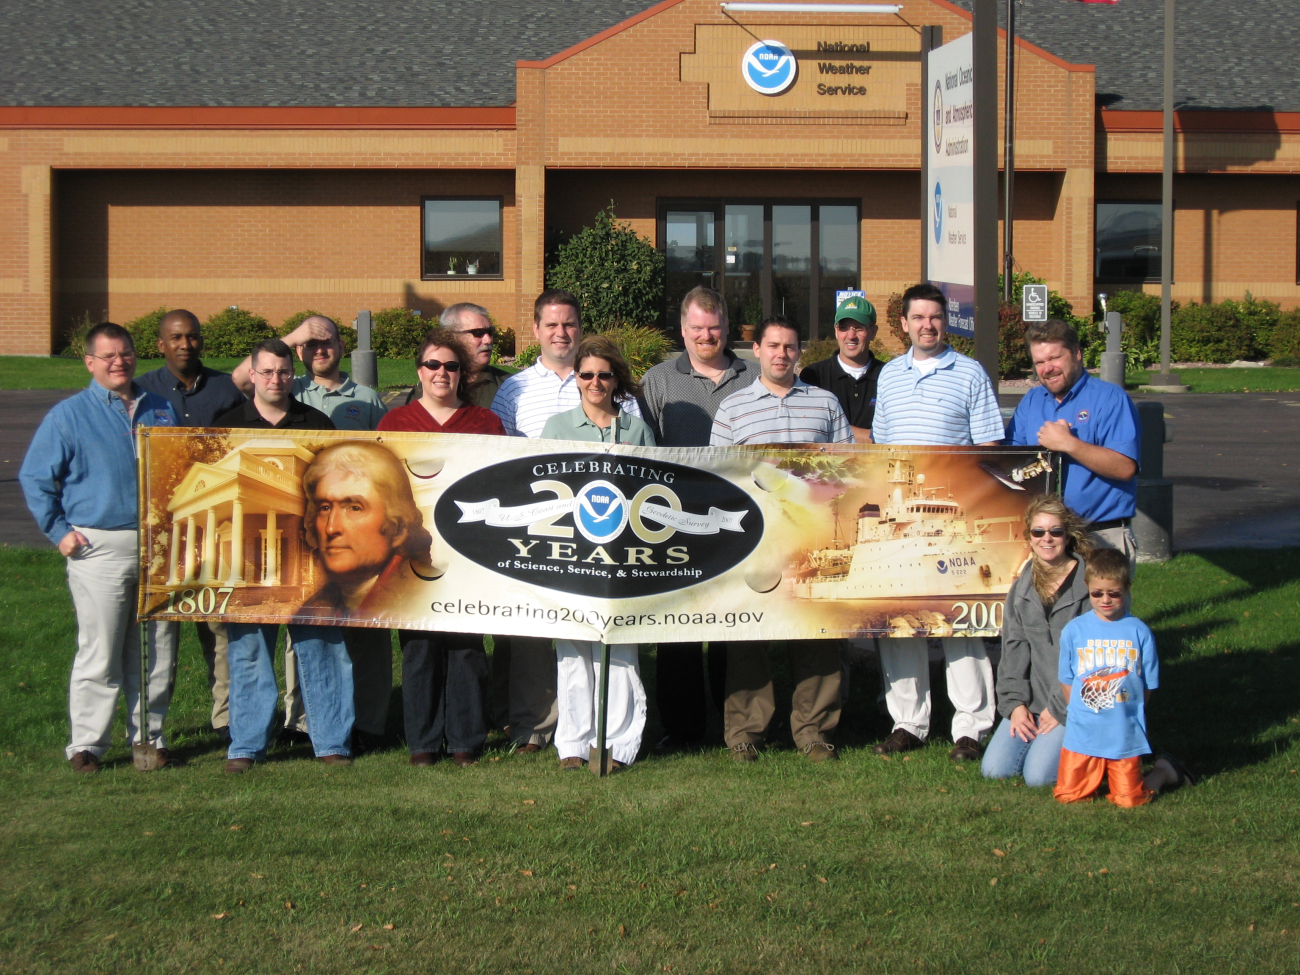 National Weather Service personnel from Aberdeen, South Dakota shown outsidetheir facility